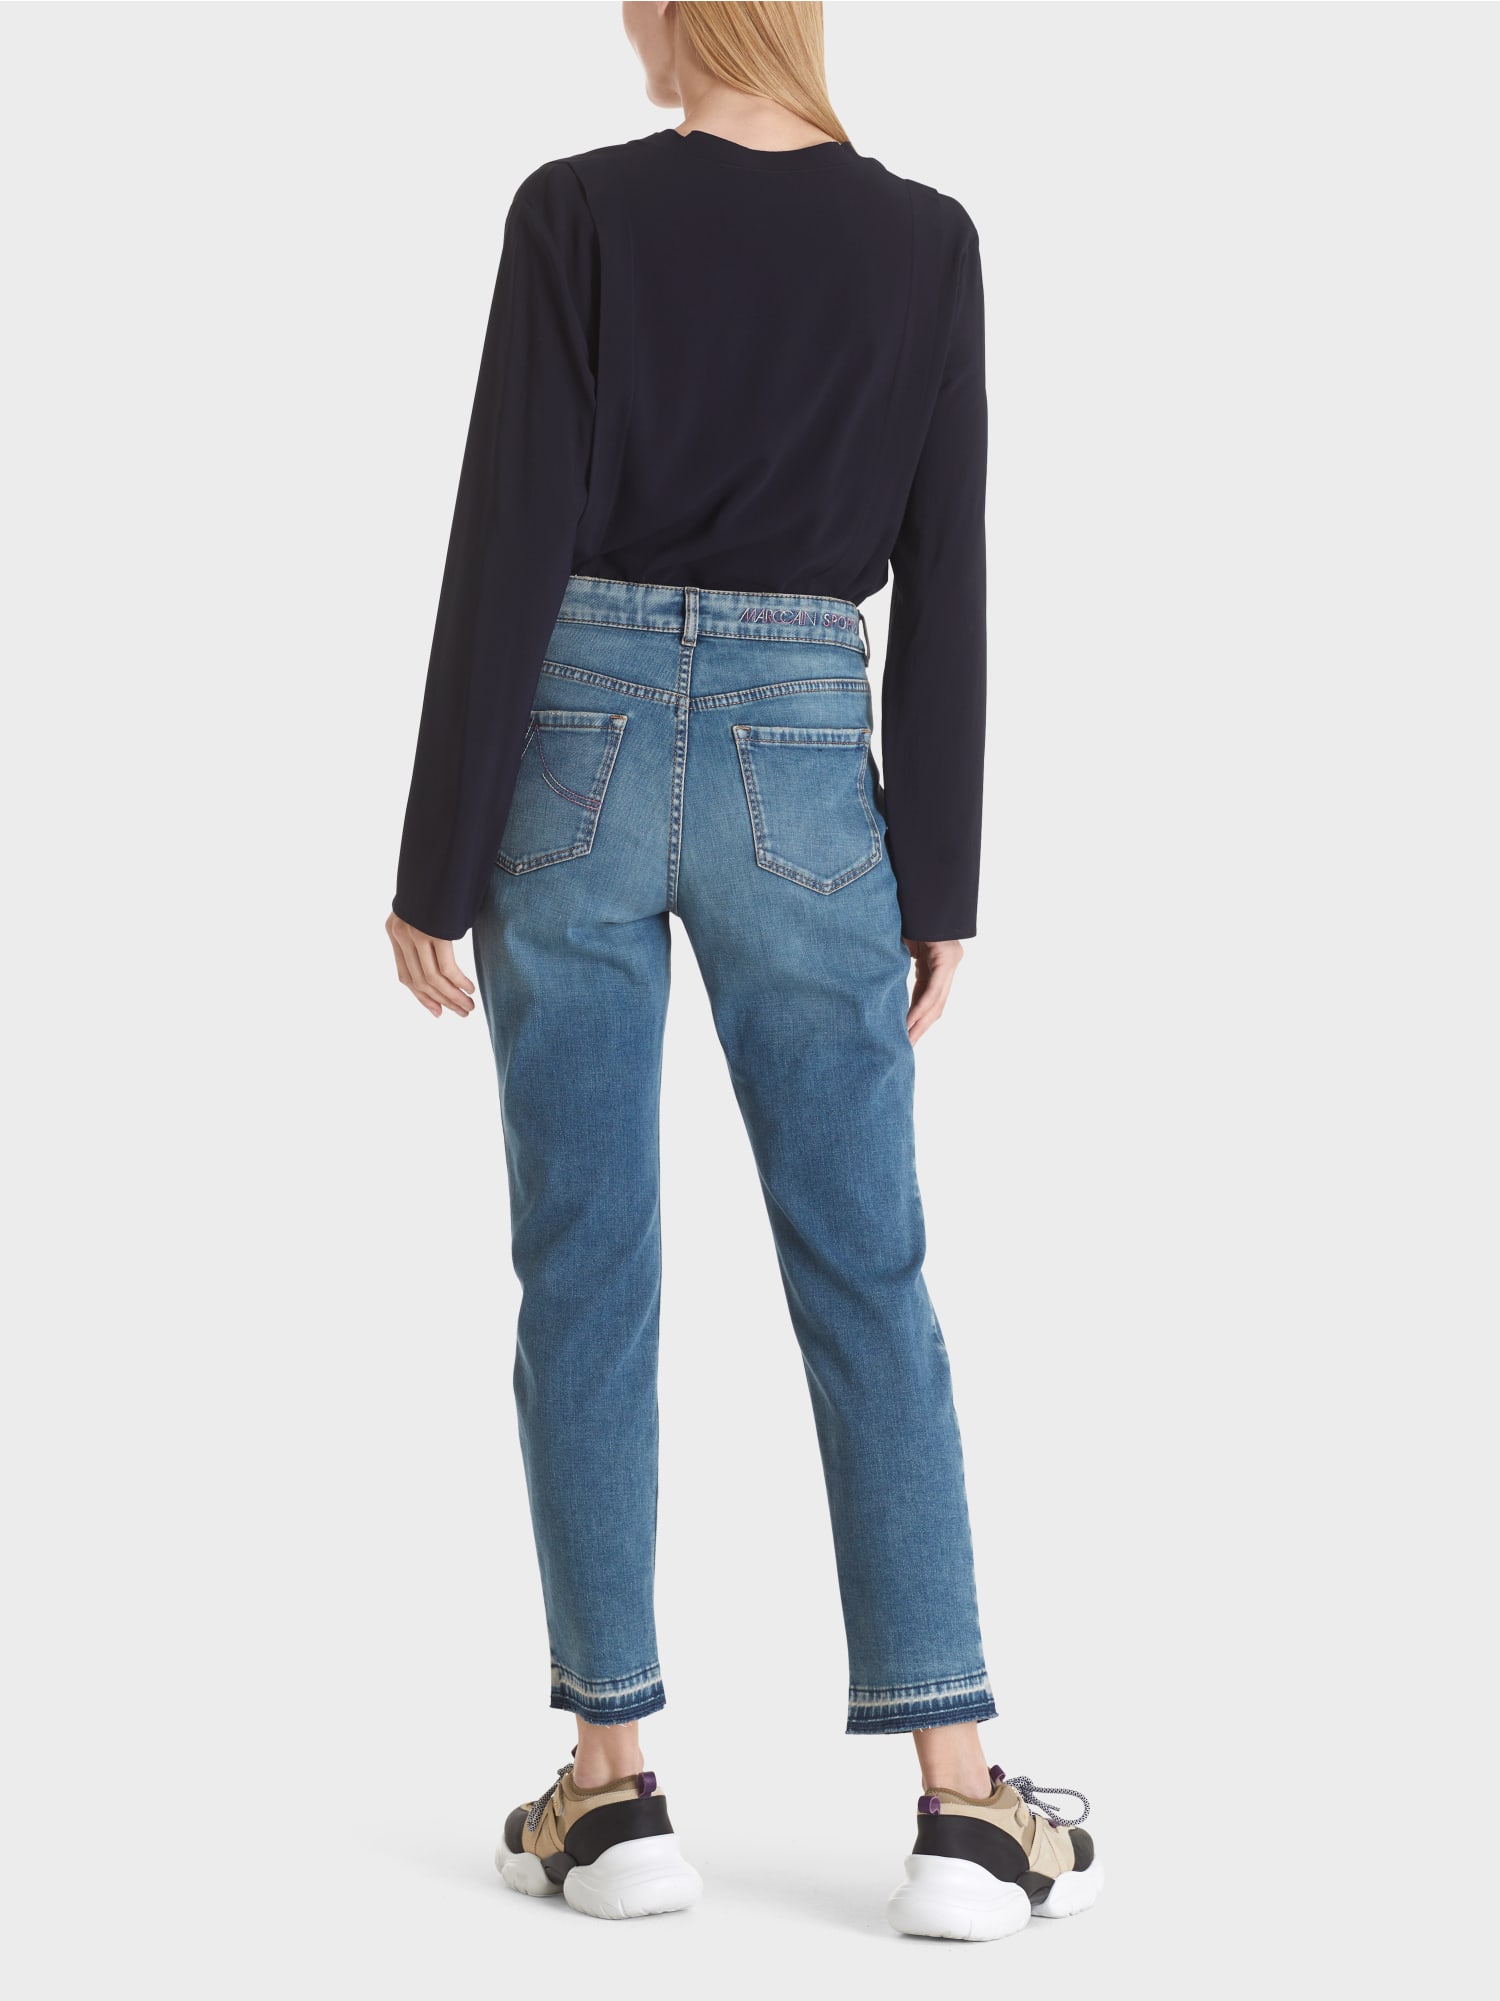 Marc Cain Sports jeans 'Rethink Together'